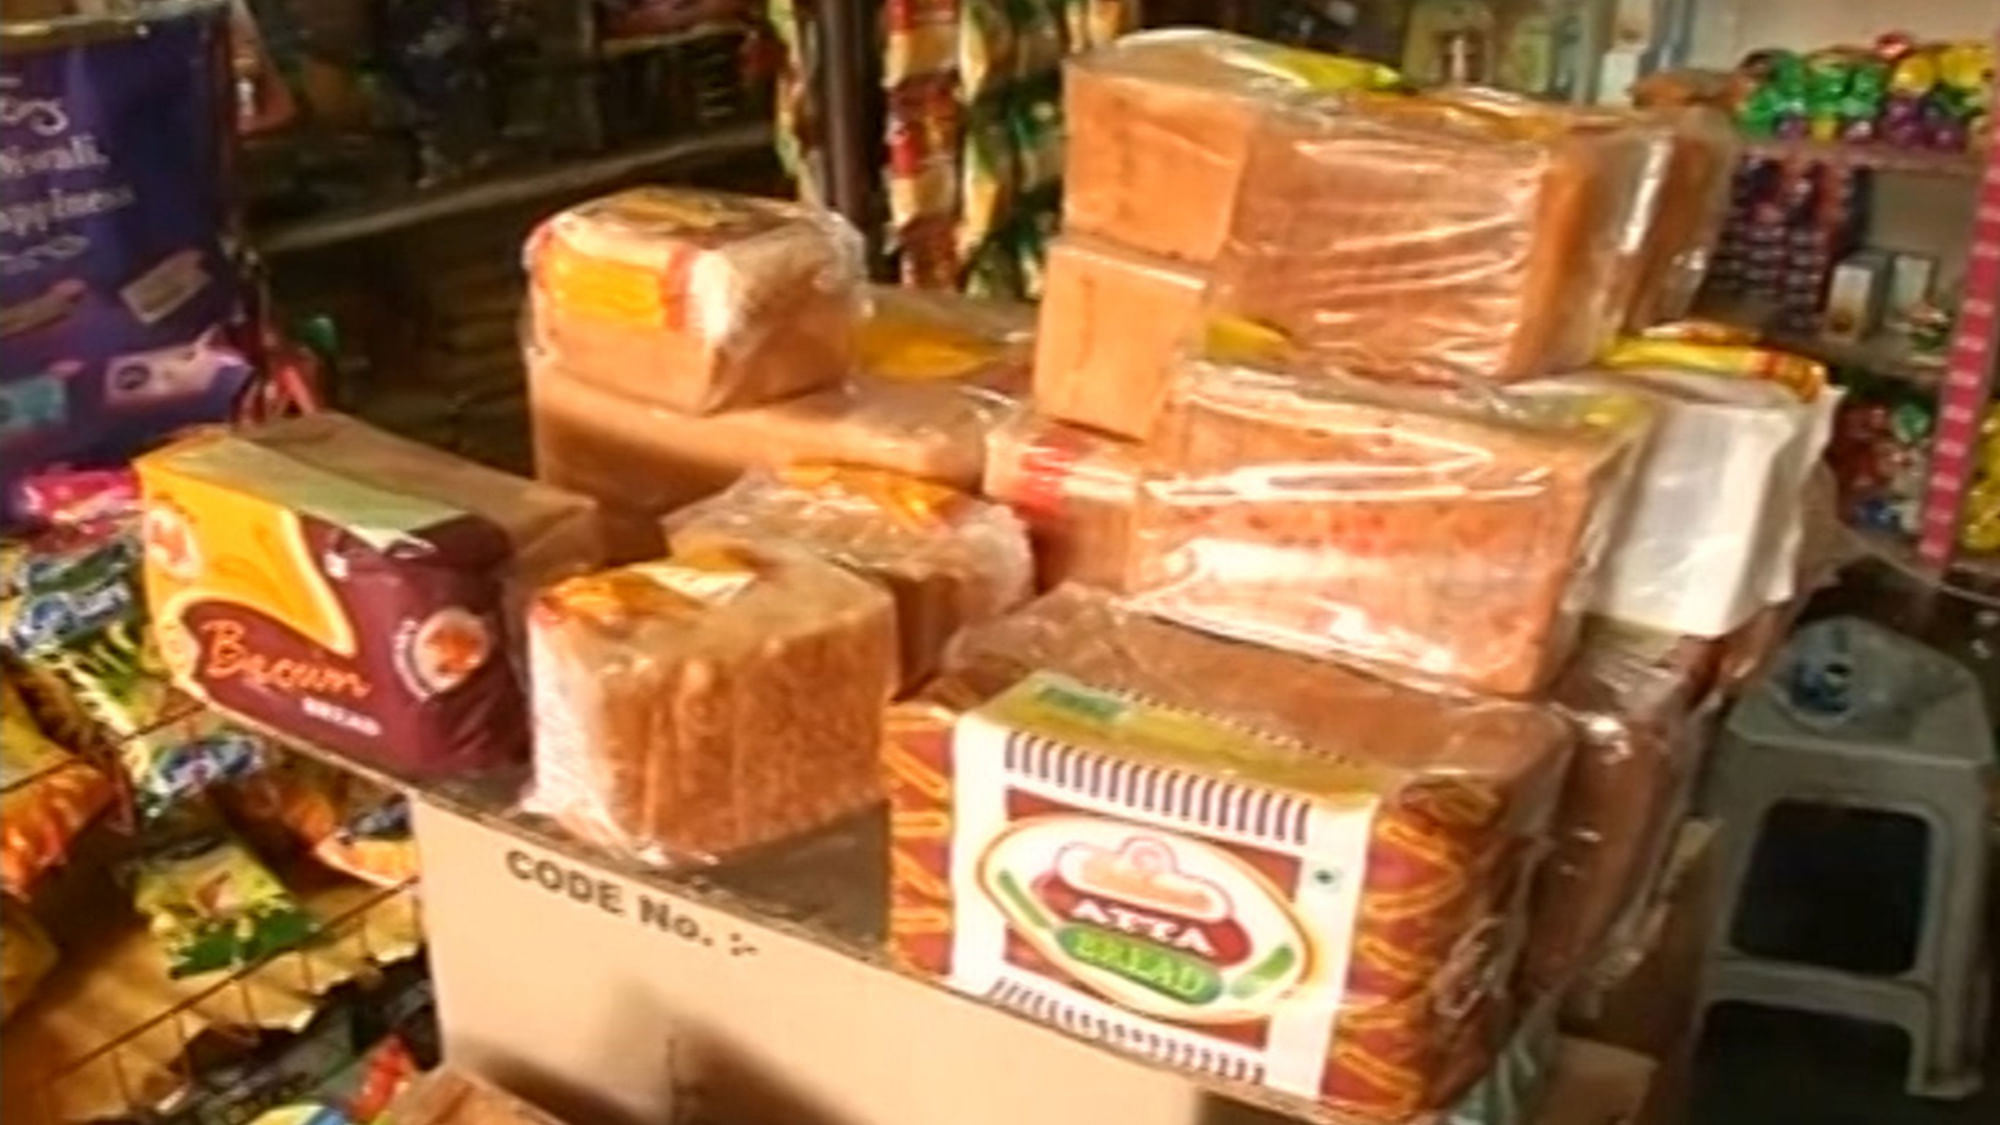 Bread samples across Delhi have been found to contain harmful carcinogenic chemicals by Centre For Science and Environment (CSE), a scientific body. (Photo: ANI screengrab)